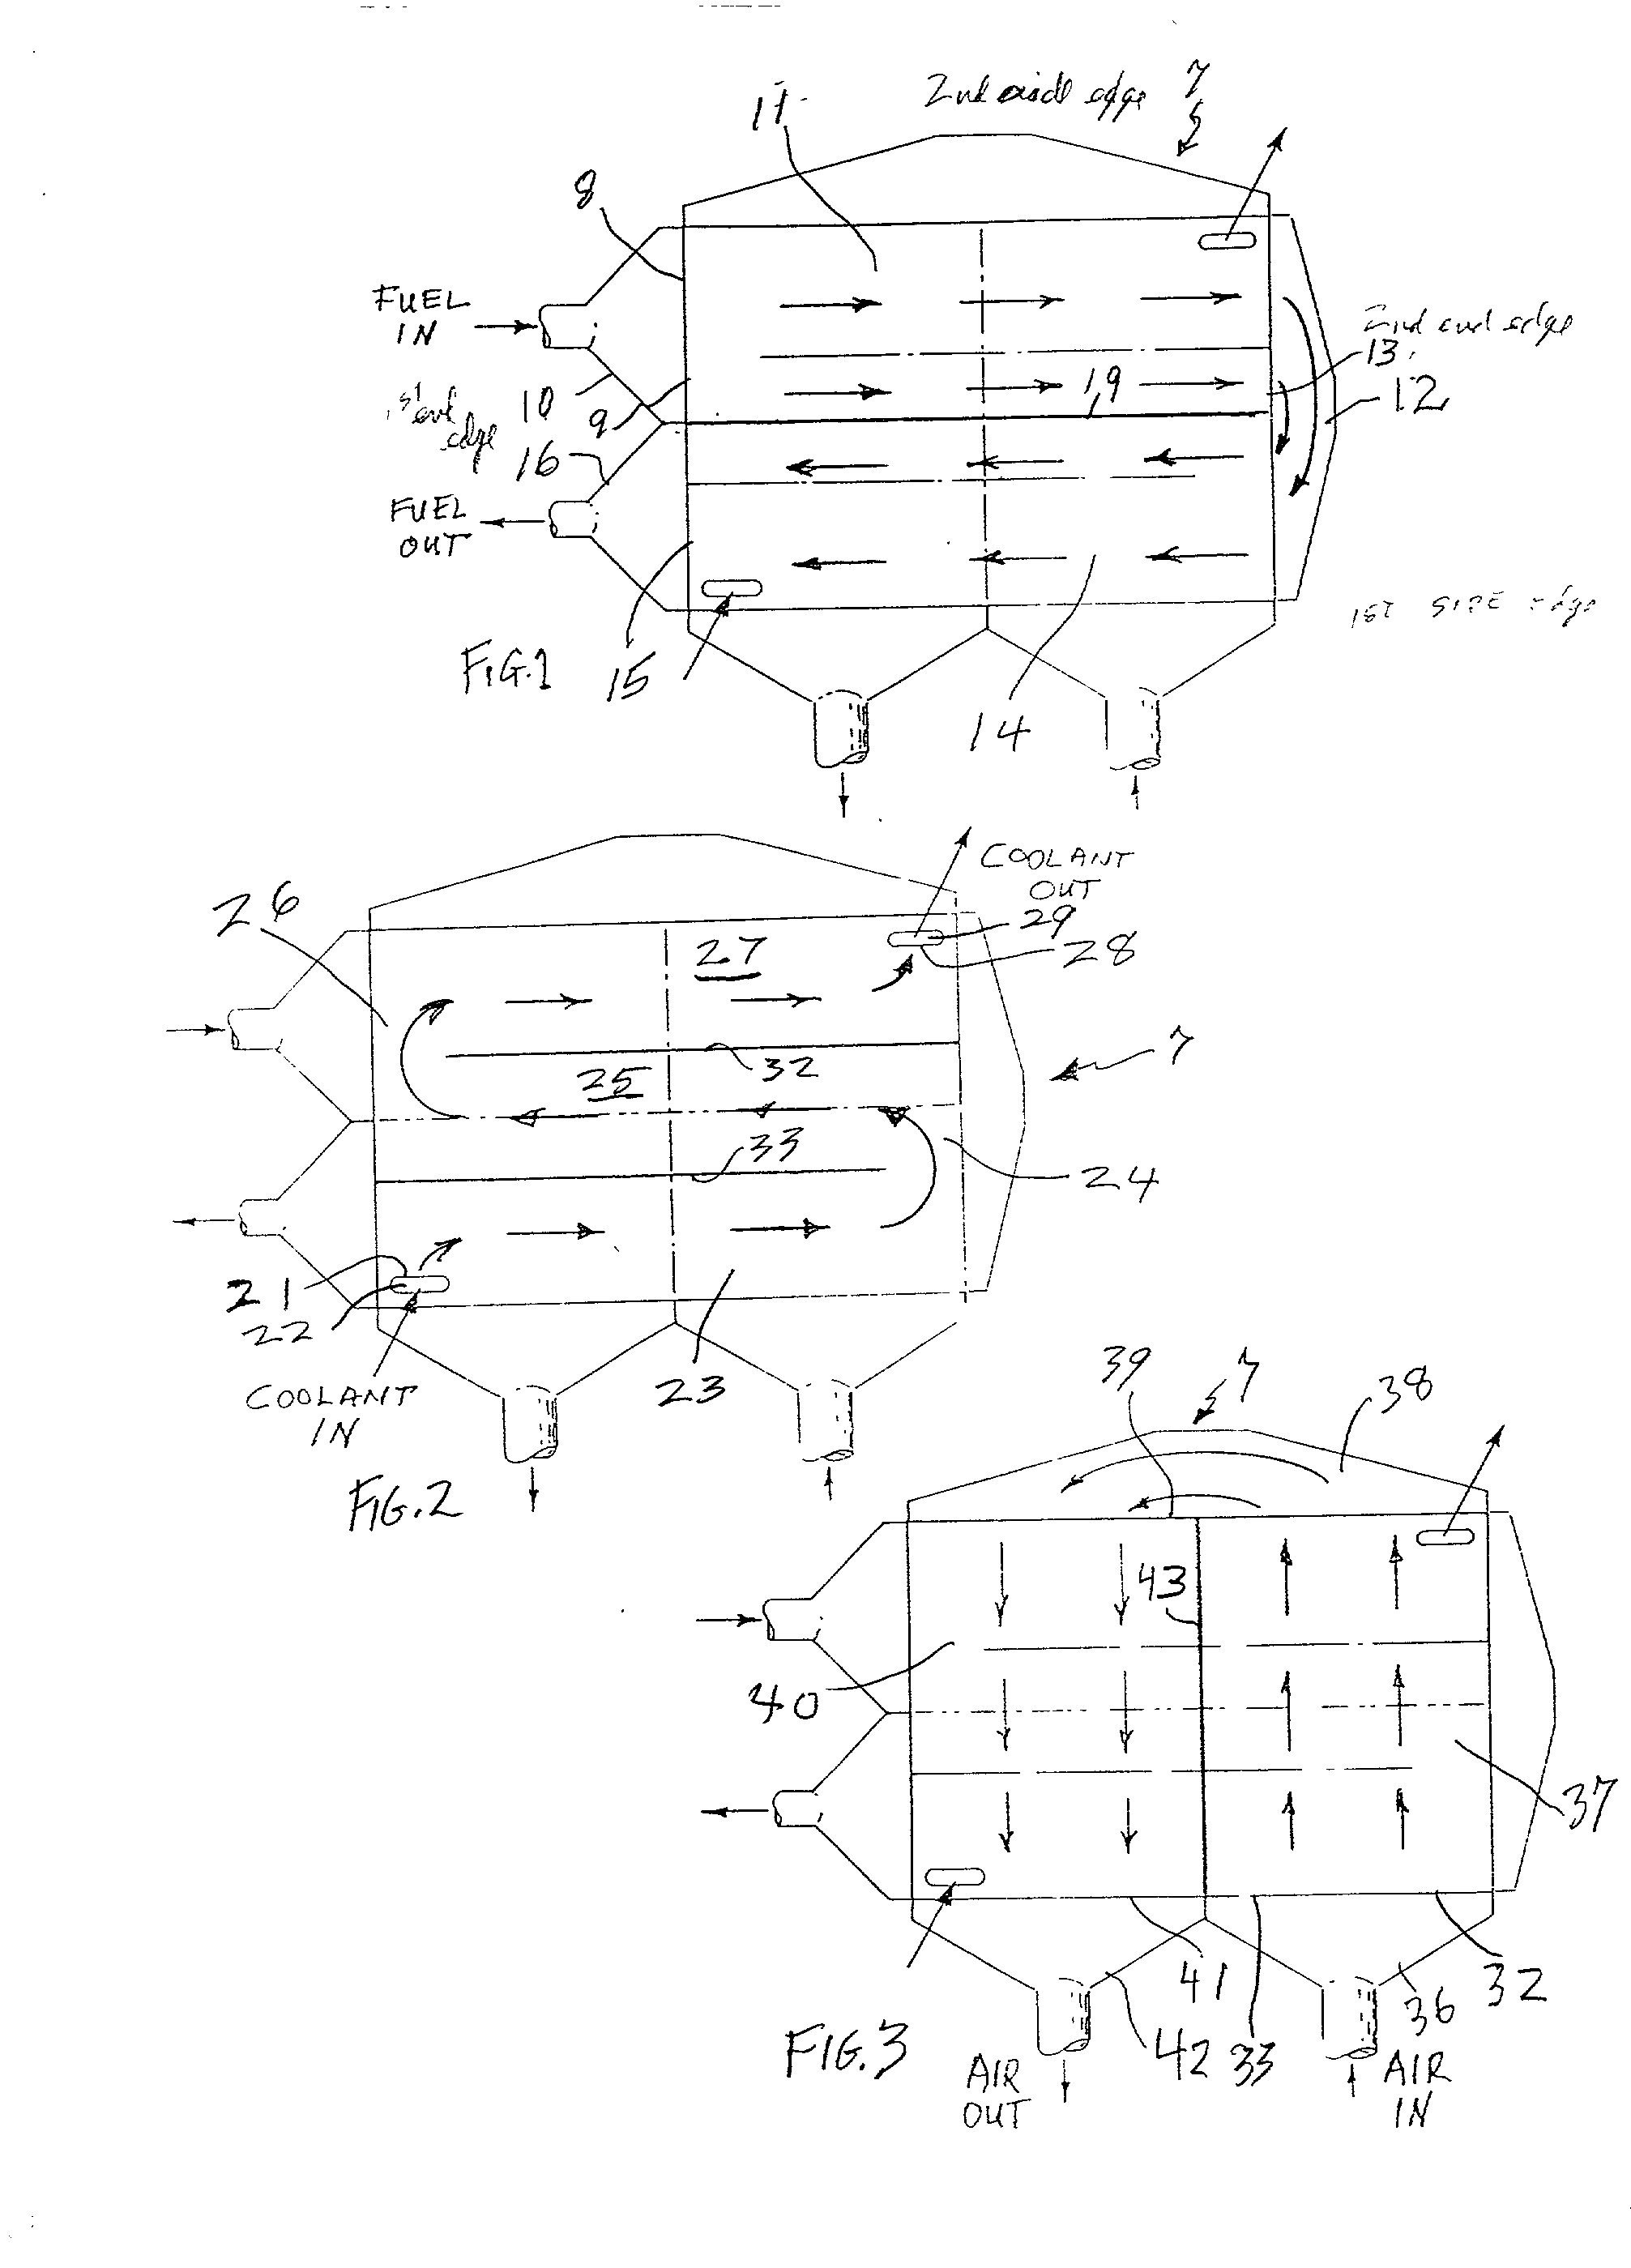 Fluid flow control for cool, efficient fuel cell operation